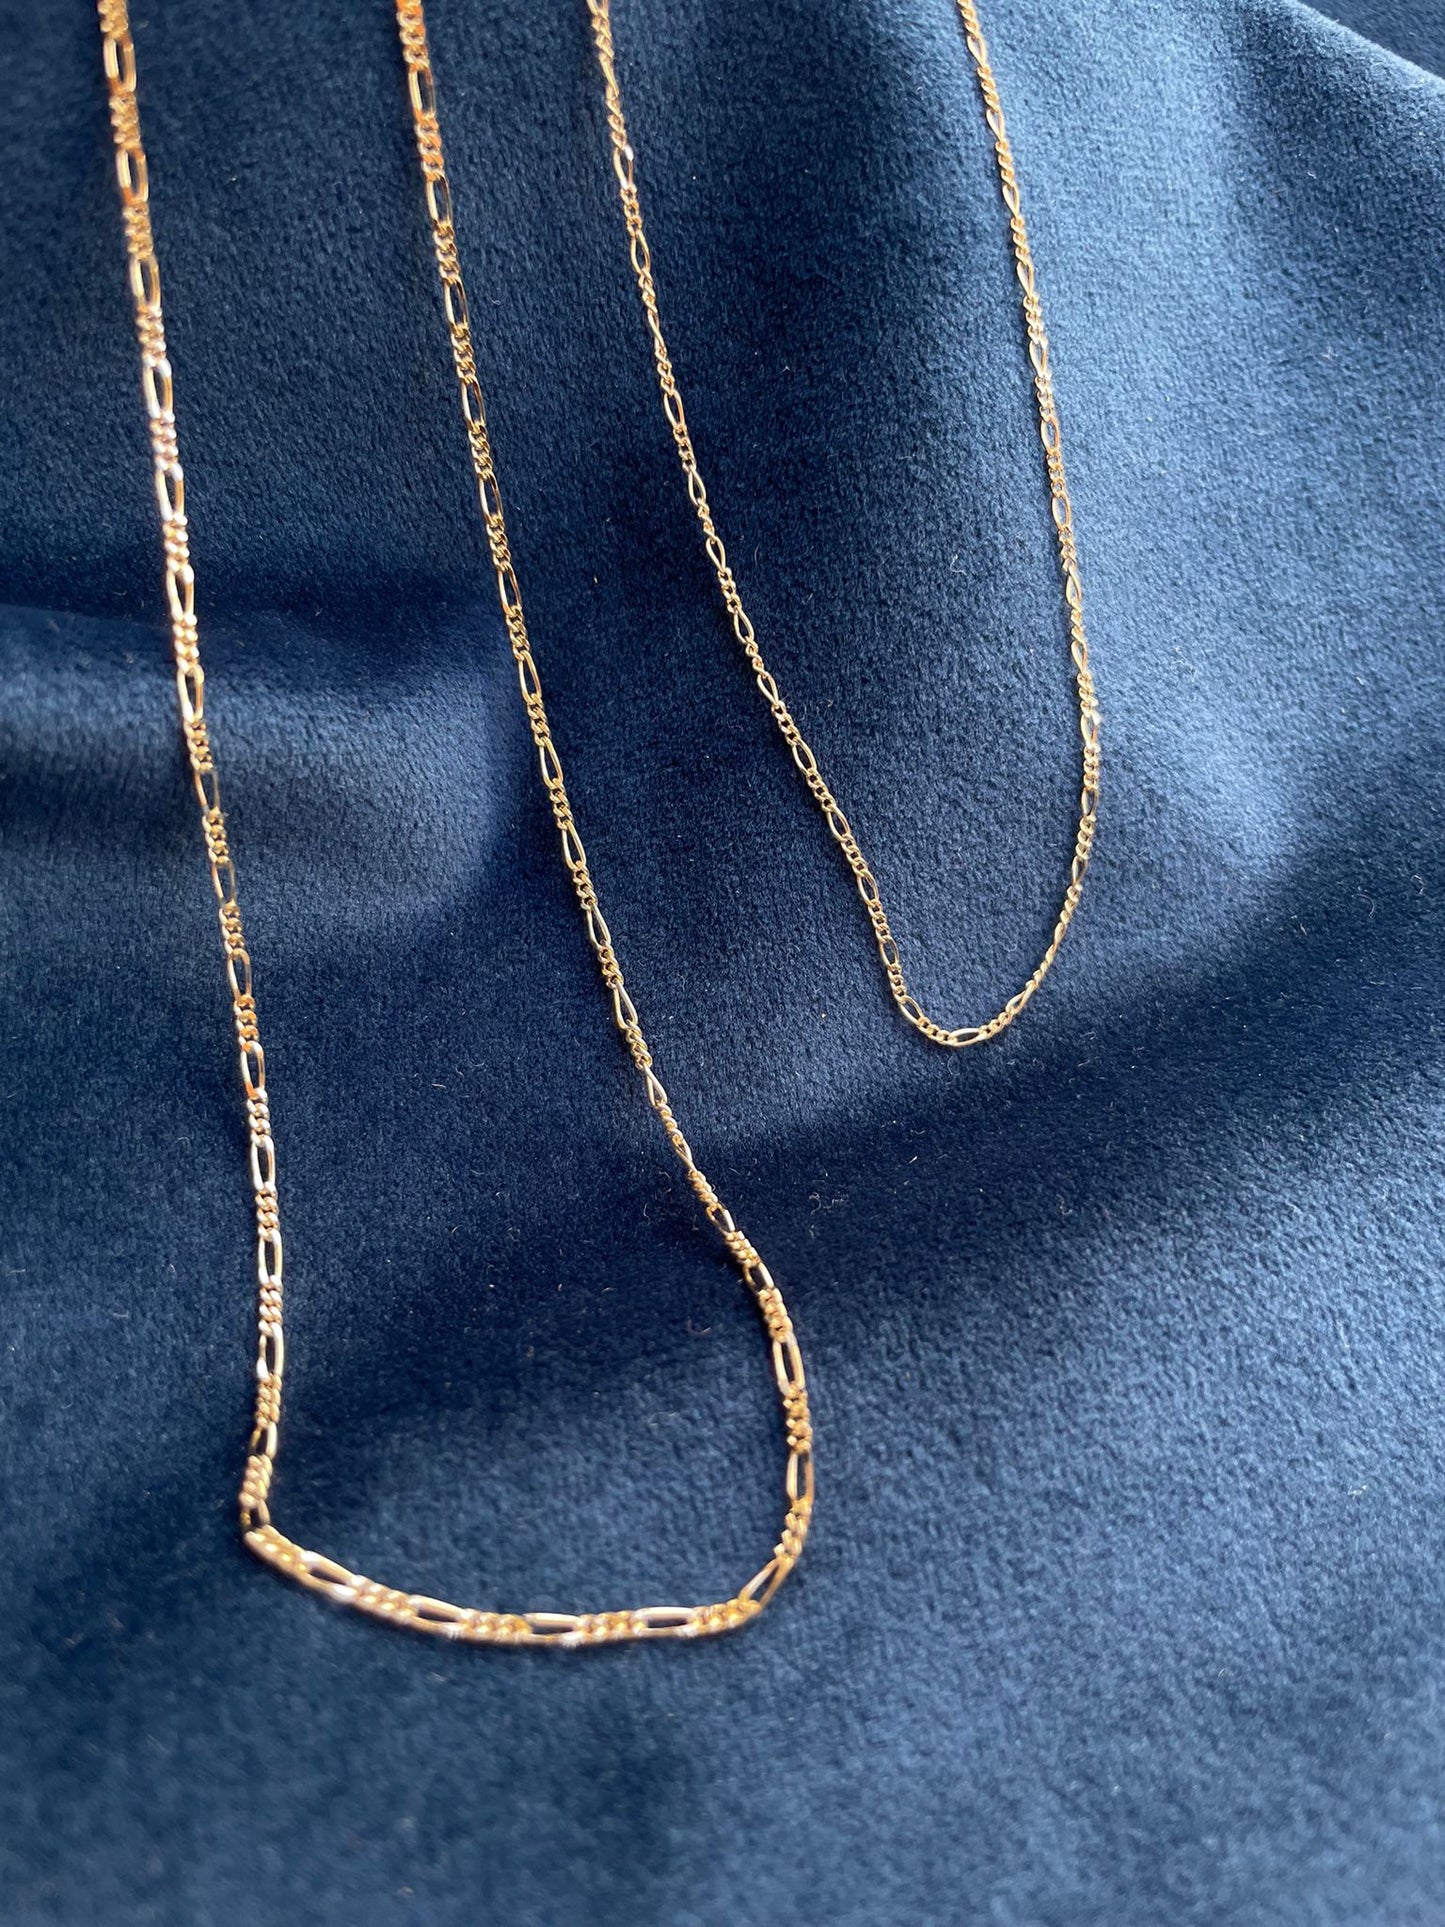 18 karat gold Figaro chain. The chain features an alternating pattern of elongated oval links and shorter round links. It is available in a variety of lengths.